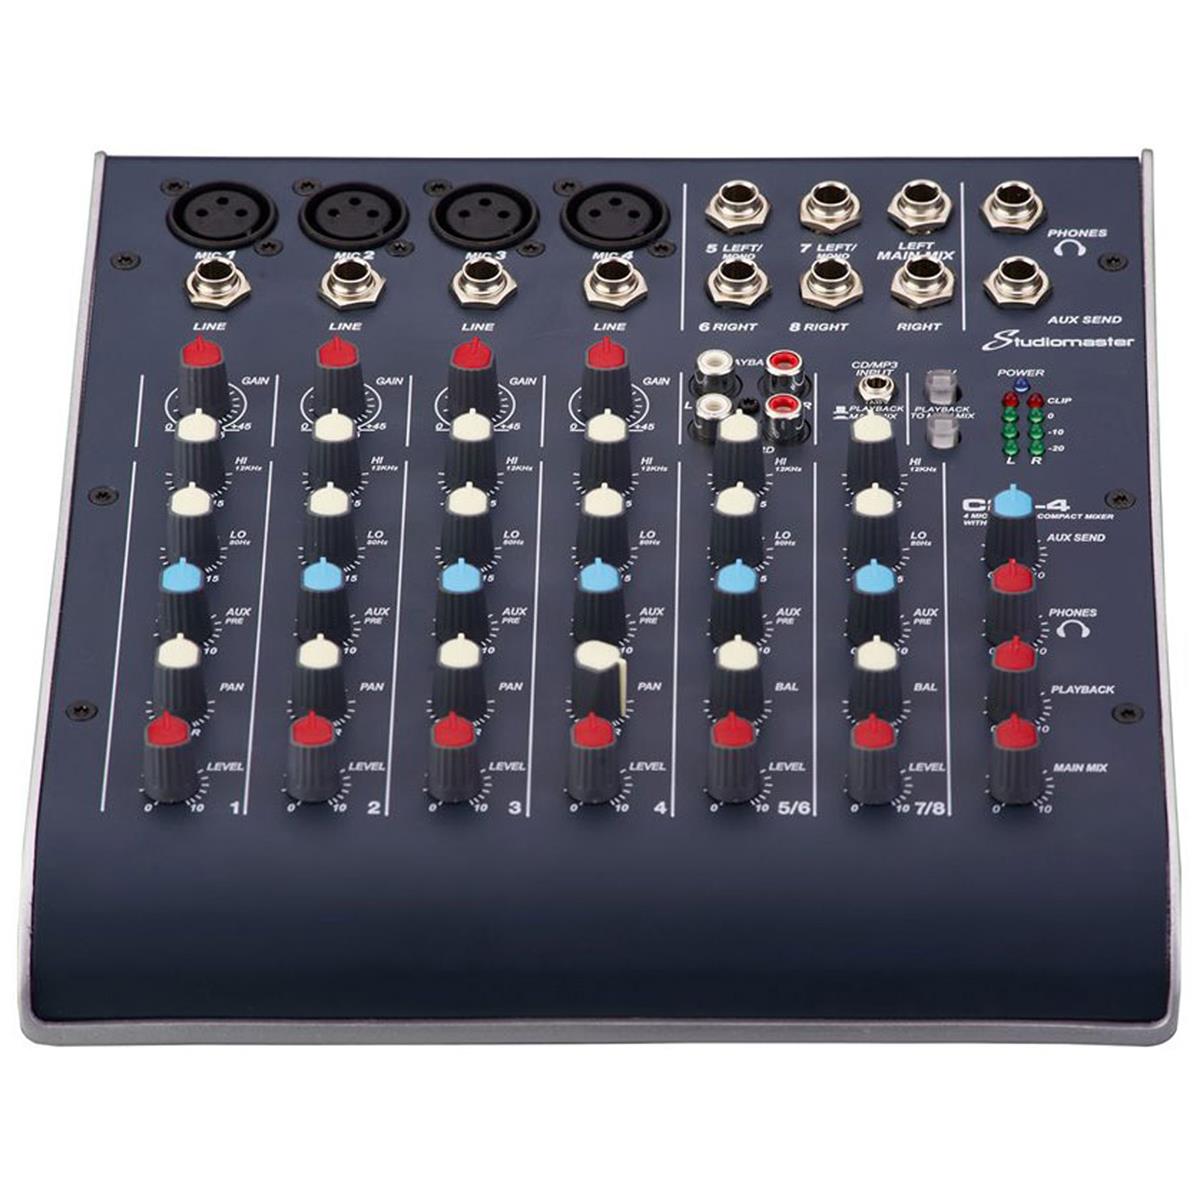 8-Channel Ultra Compact Analog Console Mixer with 2 Band EQ - Studiomaster C2-4